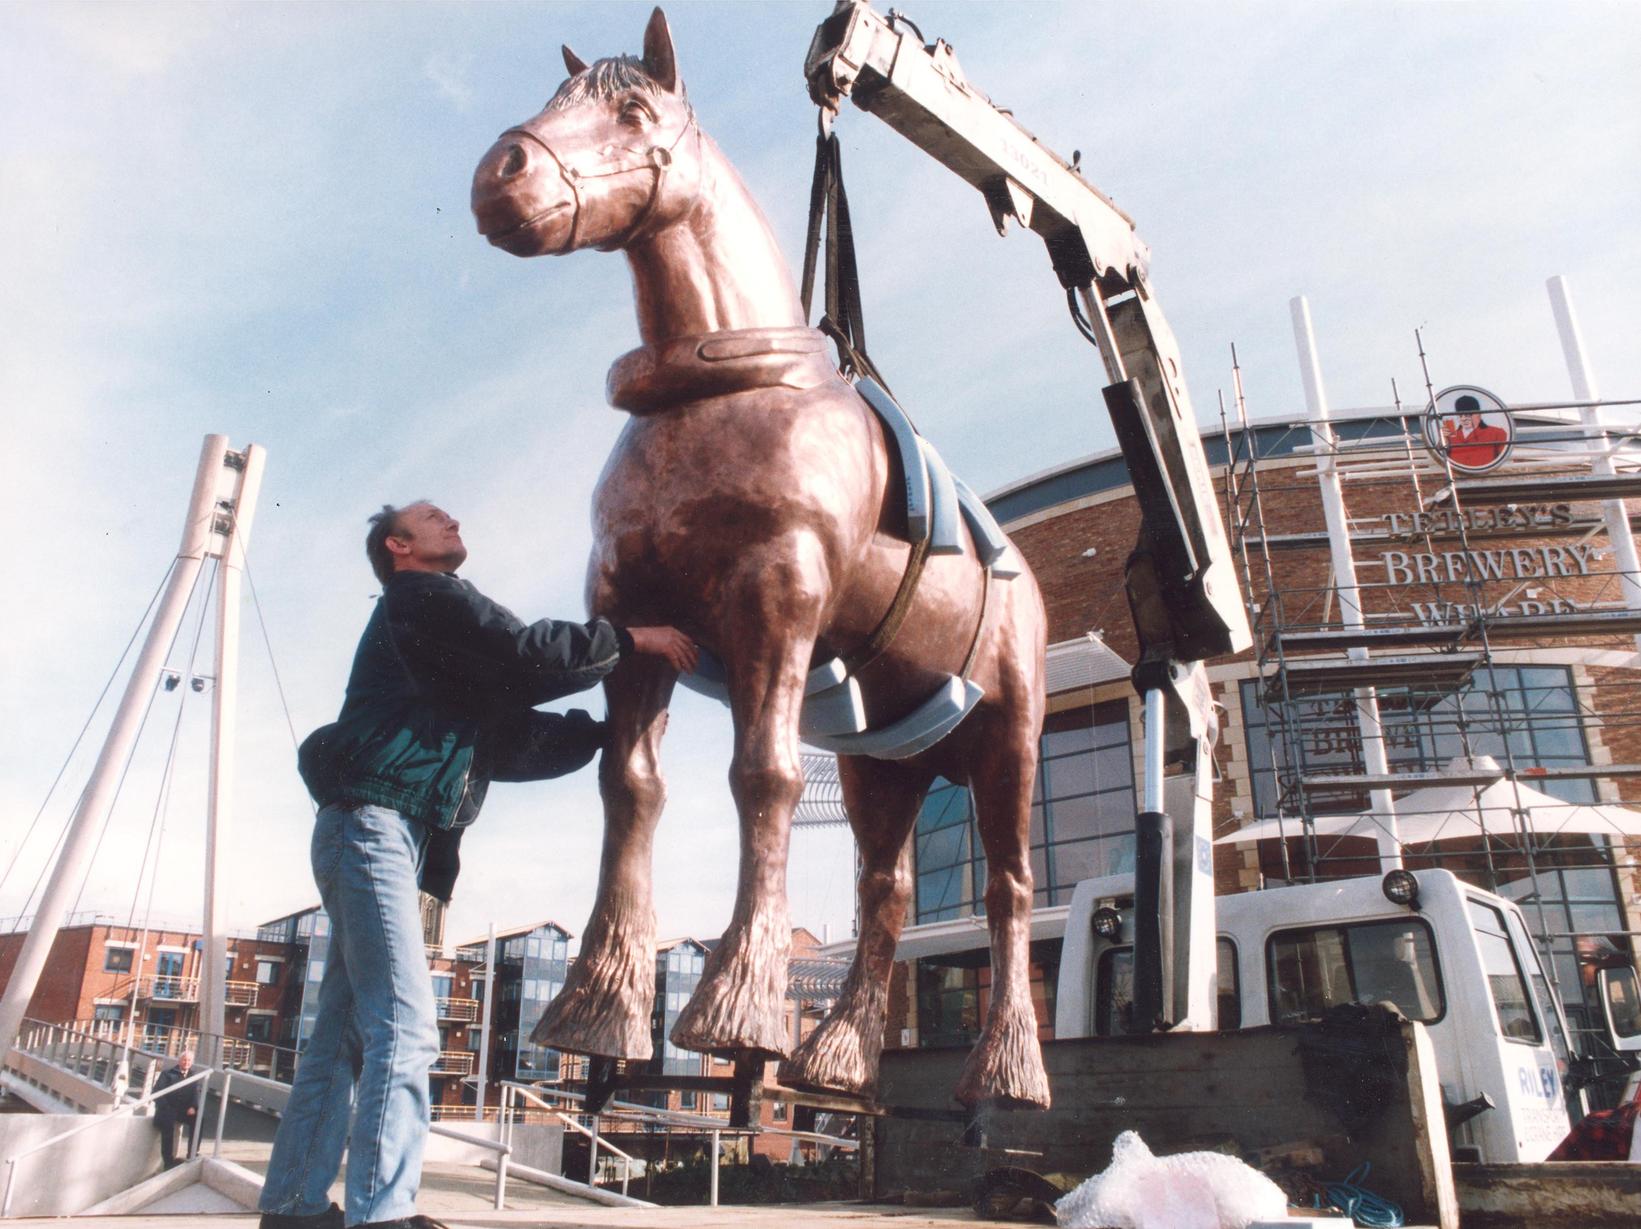 This equine attraction was set to pull in the sightseers to the Leeds waterfront. The eight foot tall copper statue was located outside the Tetley's Brewery Wharf visitor centre. It was the work of artists Peter and Rachel Minister